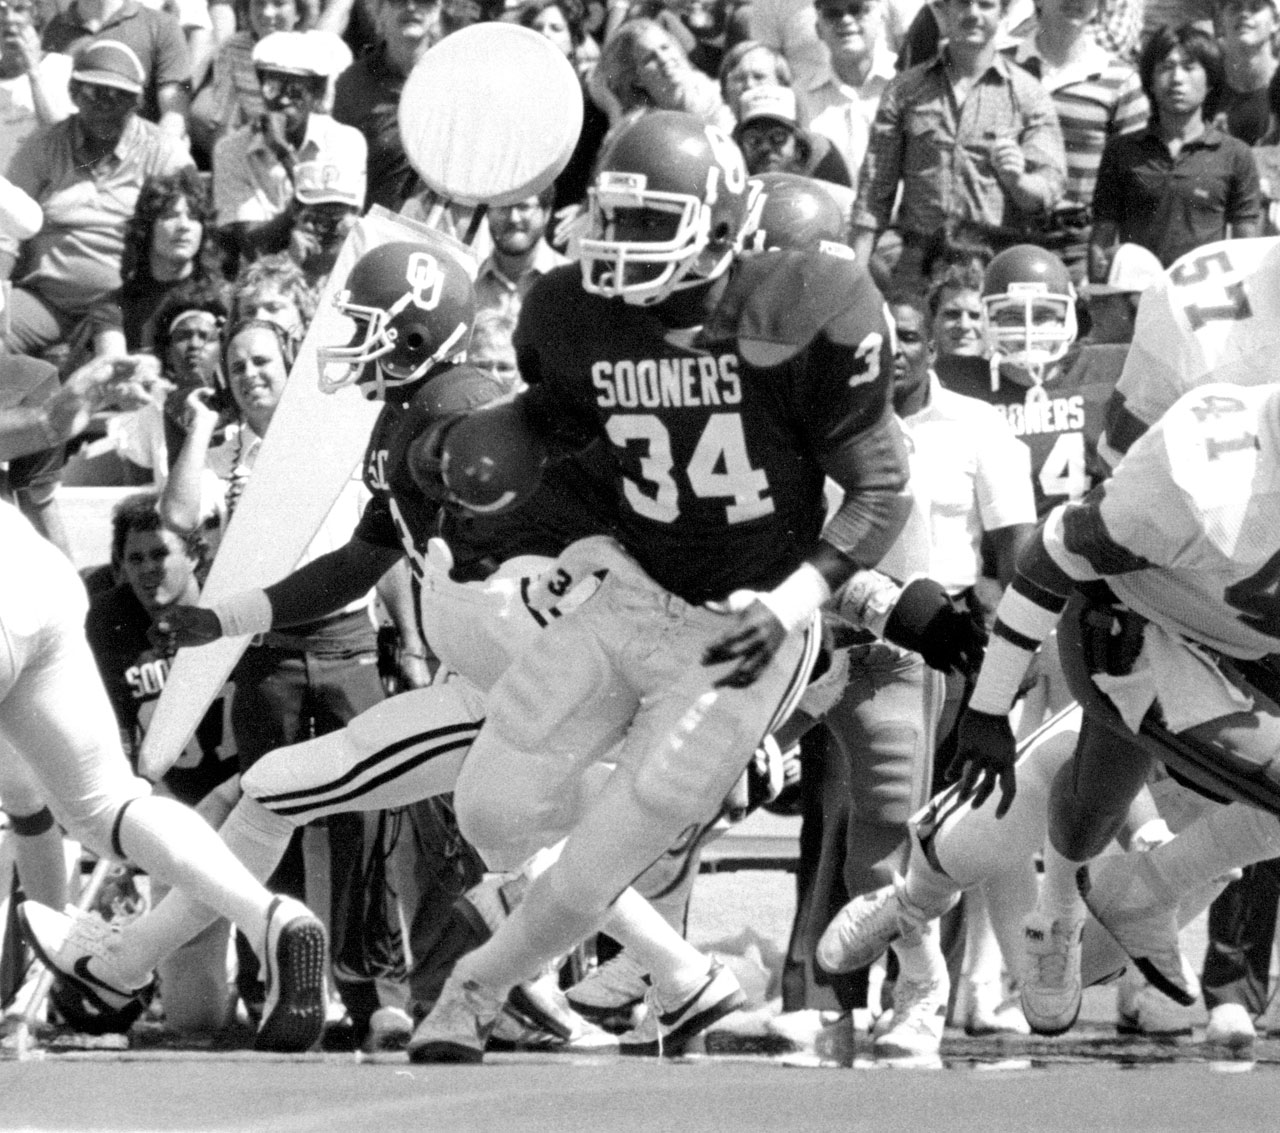 Tillman was an All-American running back at OU from 1982-86 and was captain of the 1985 National Championship team. (Photo: University of Oklahoma Athletic Communications)